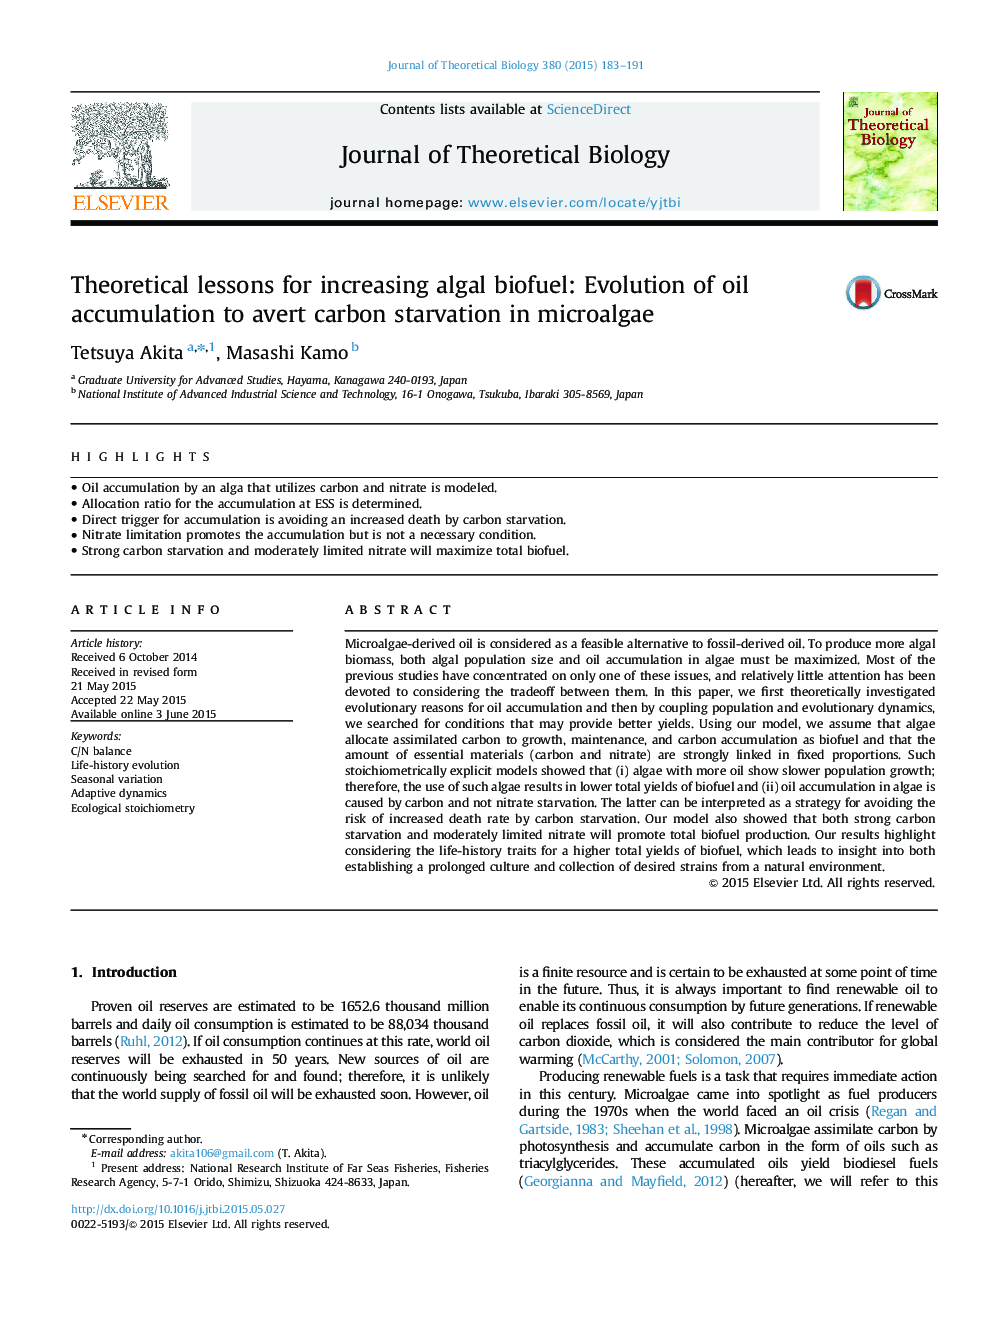 Theoretical lessons for increasing algal biofuel: Evolution of oil accumulation to avert carbon starvation in microalgae